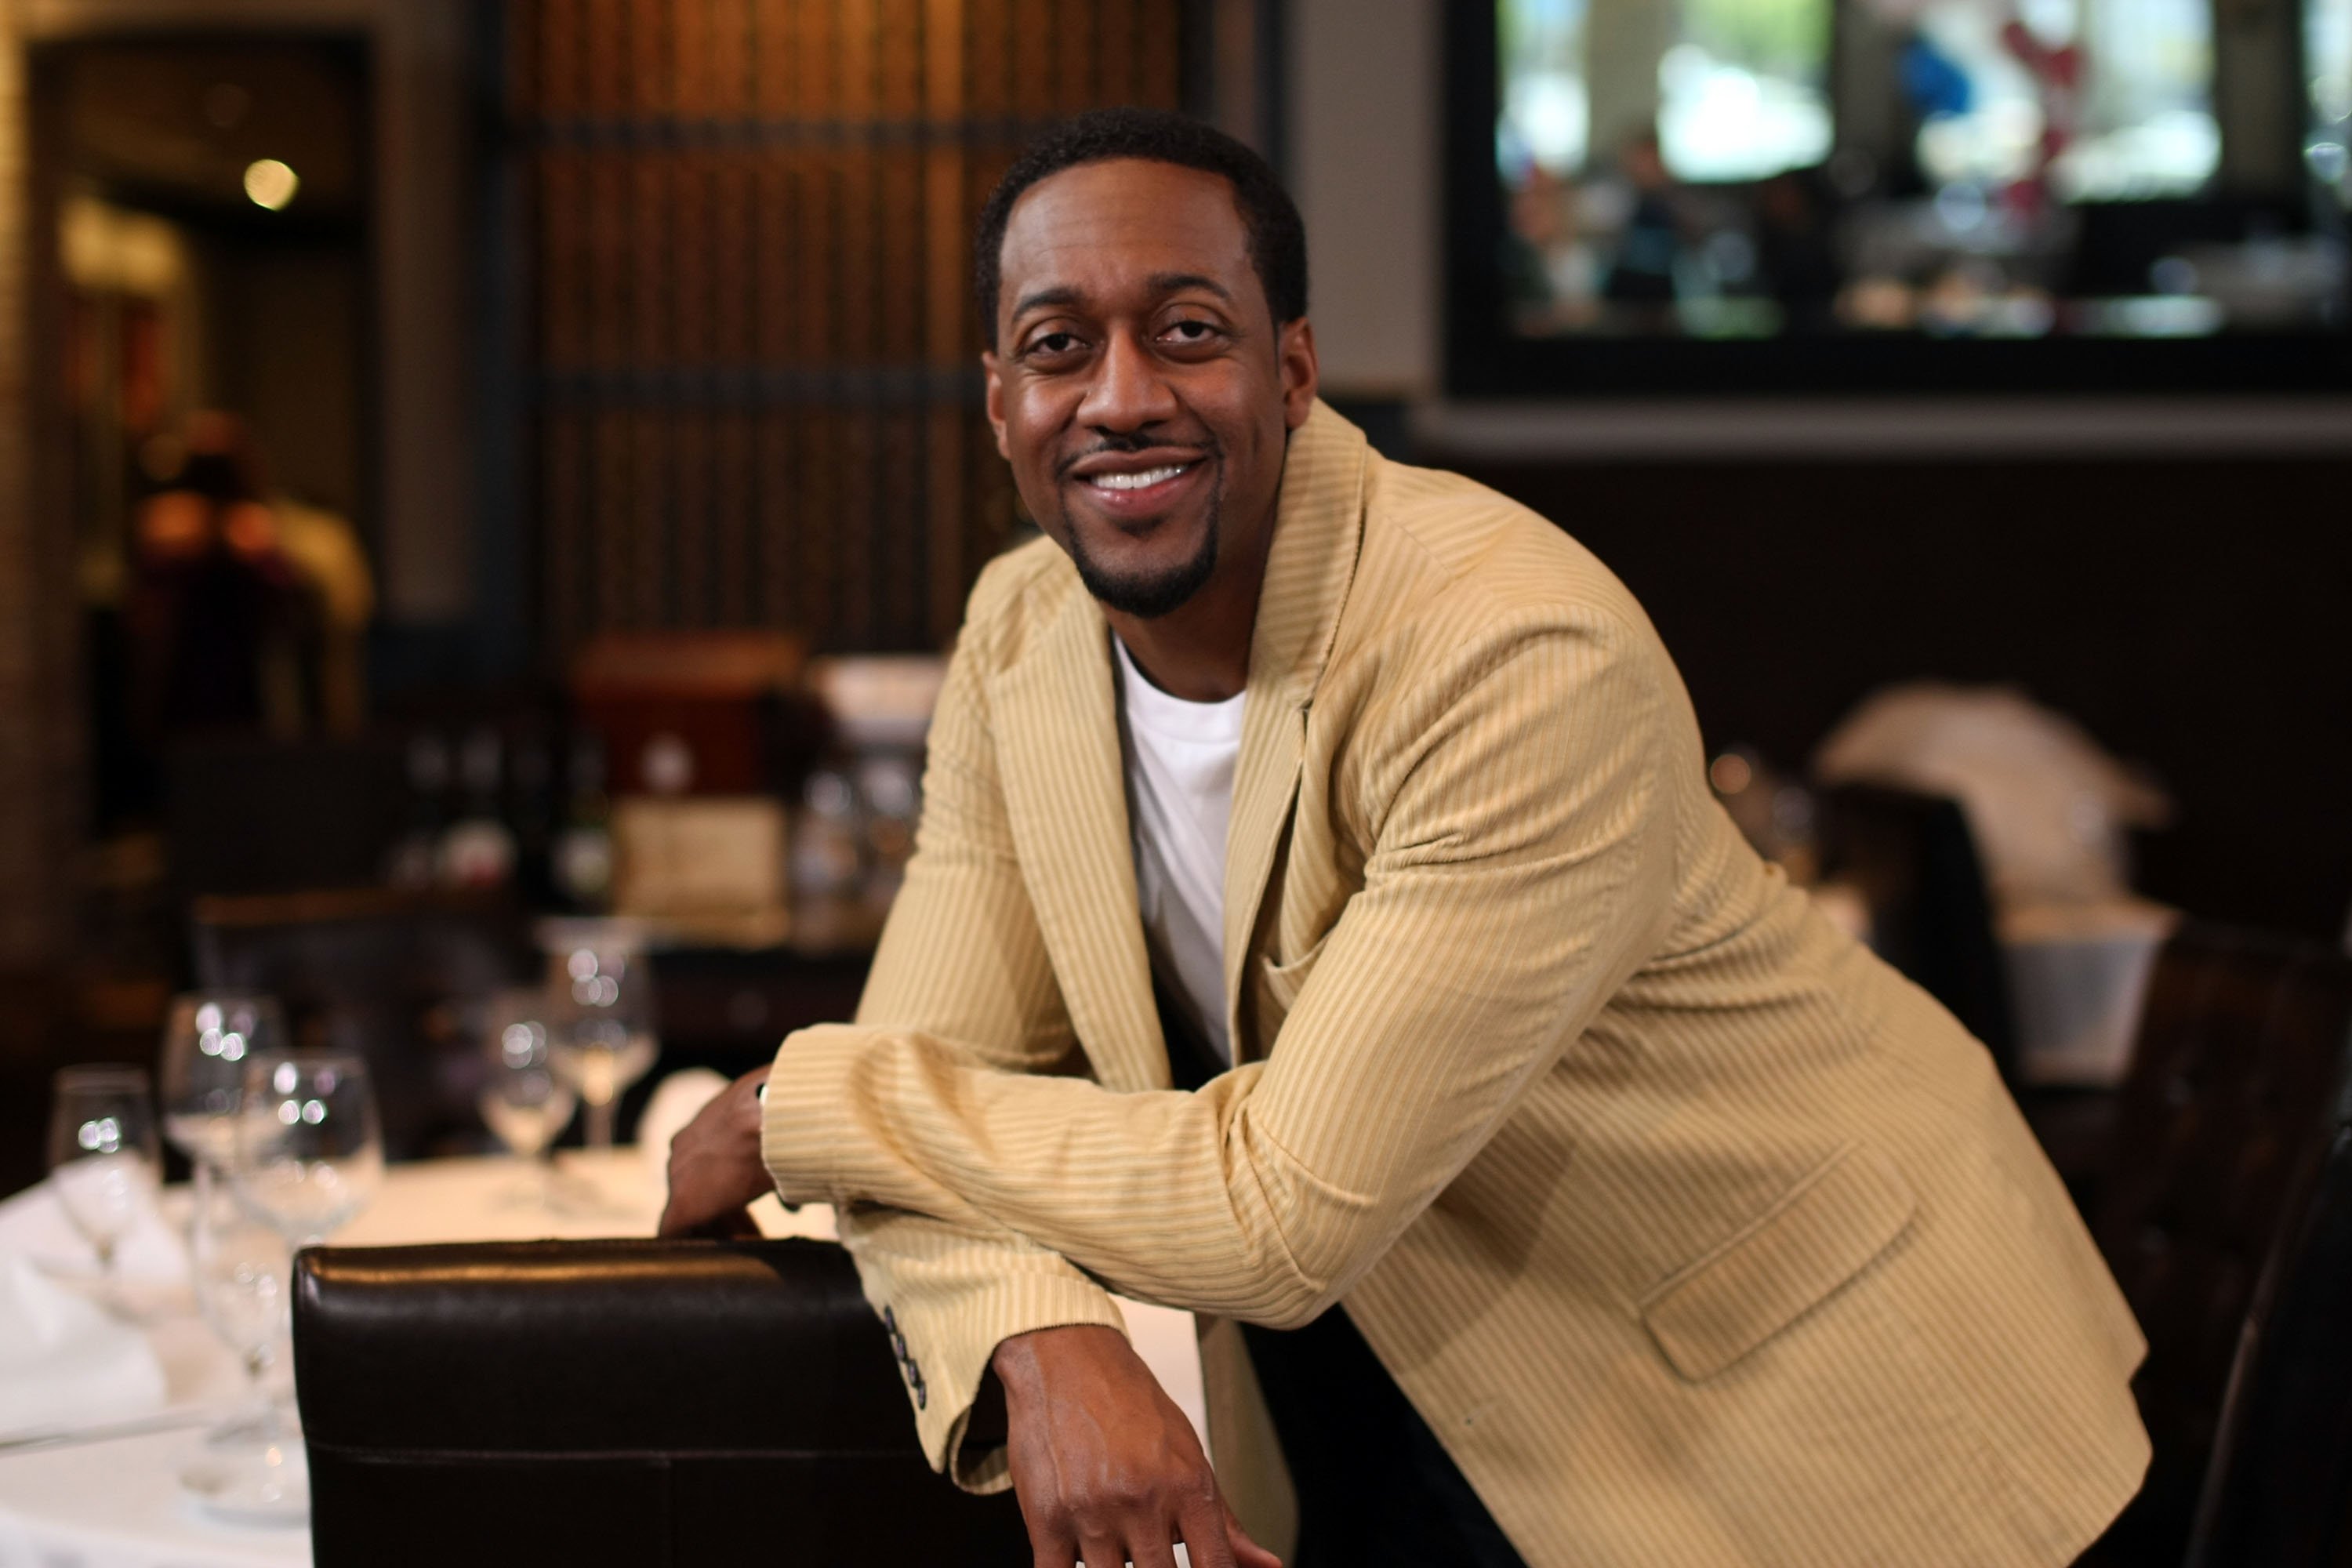 Jaleel White on the set of "Road to the Altar" in April 2009. | Photo: Getty Images